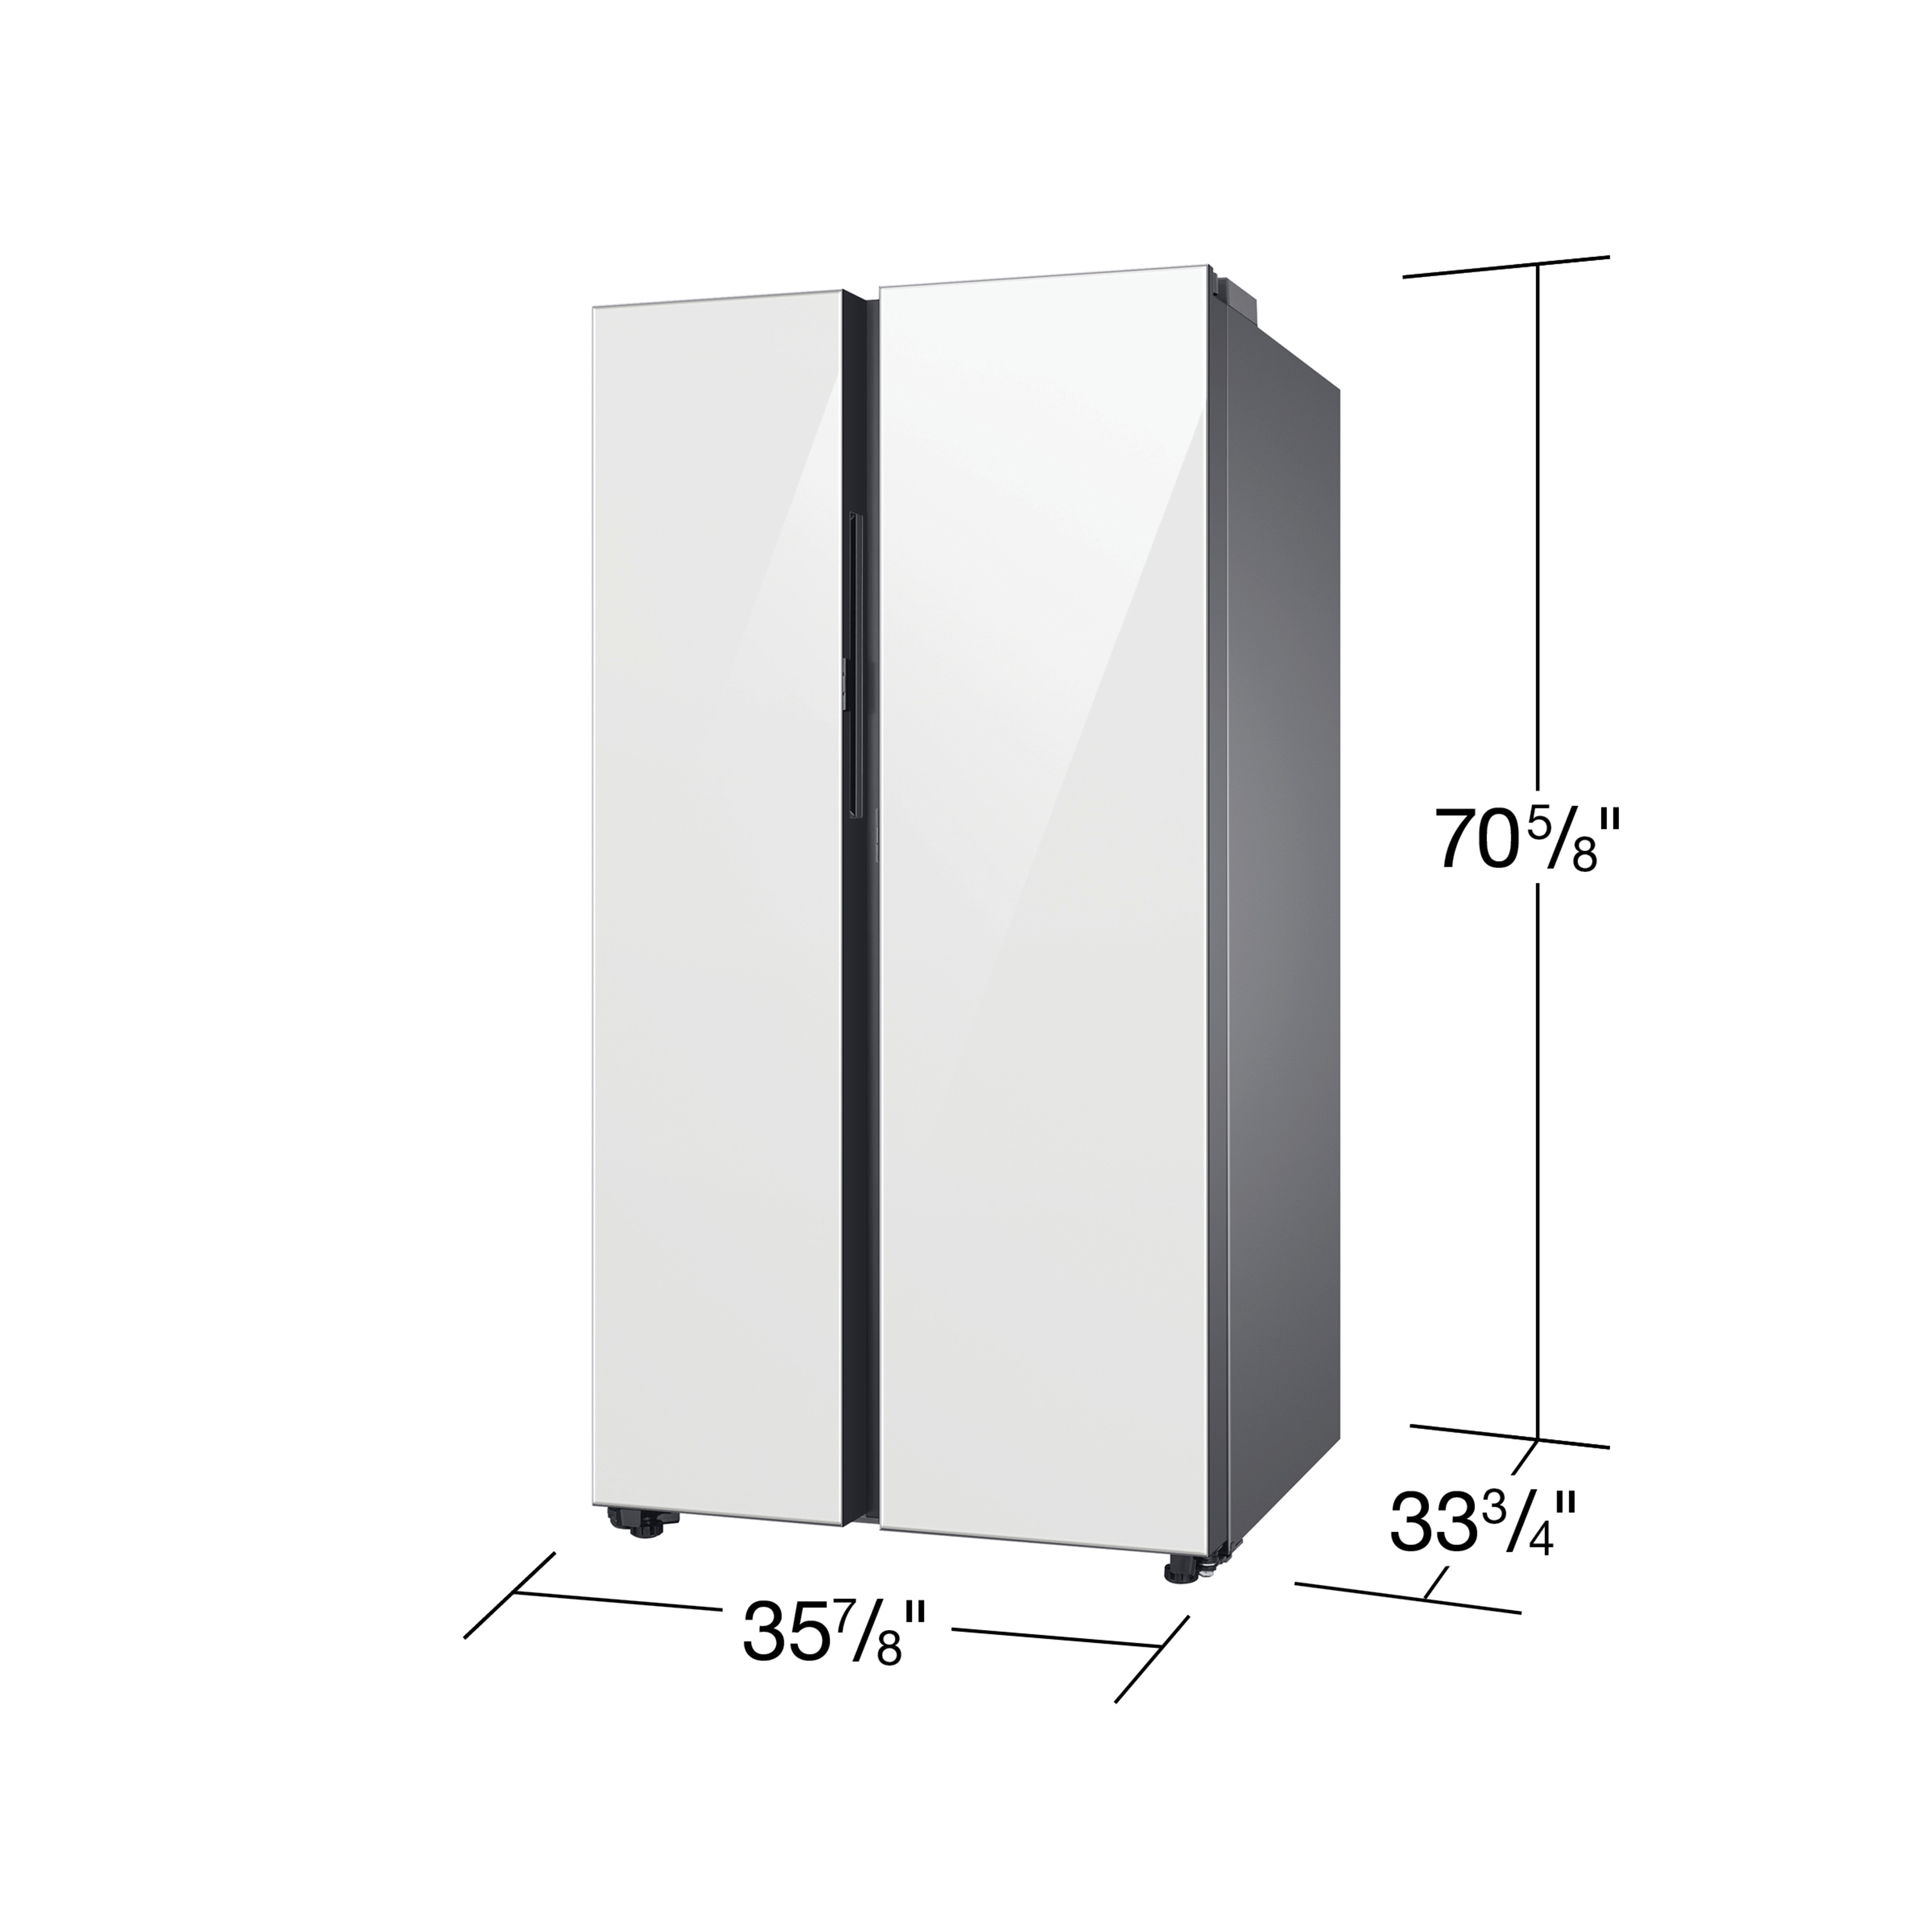 Bespoke 28 cu. | Center US Glass White Side-by-side Refrigerator ft. Samsung in with Beverage